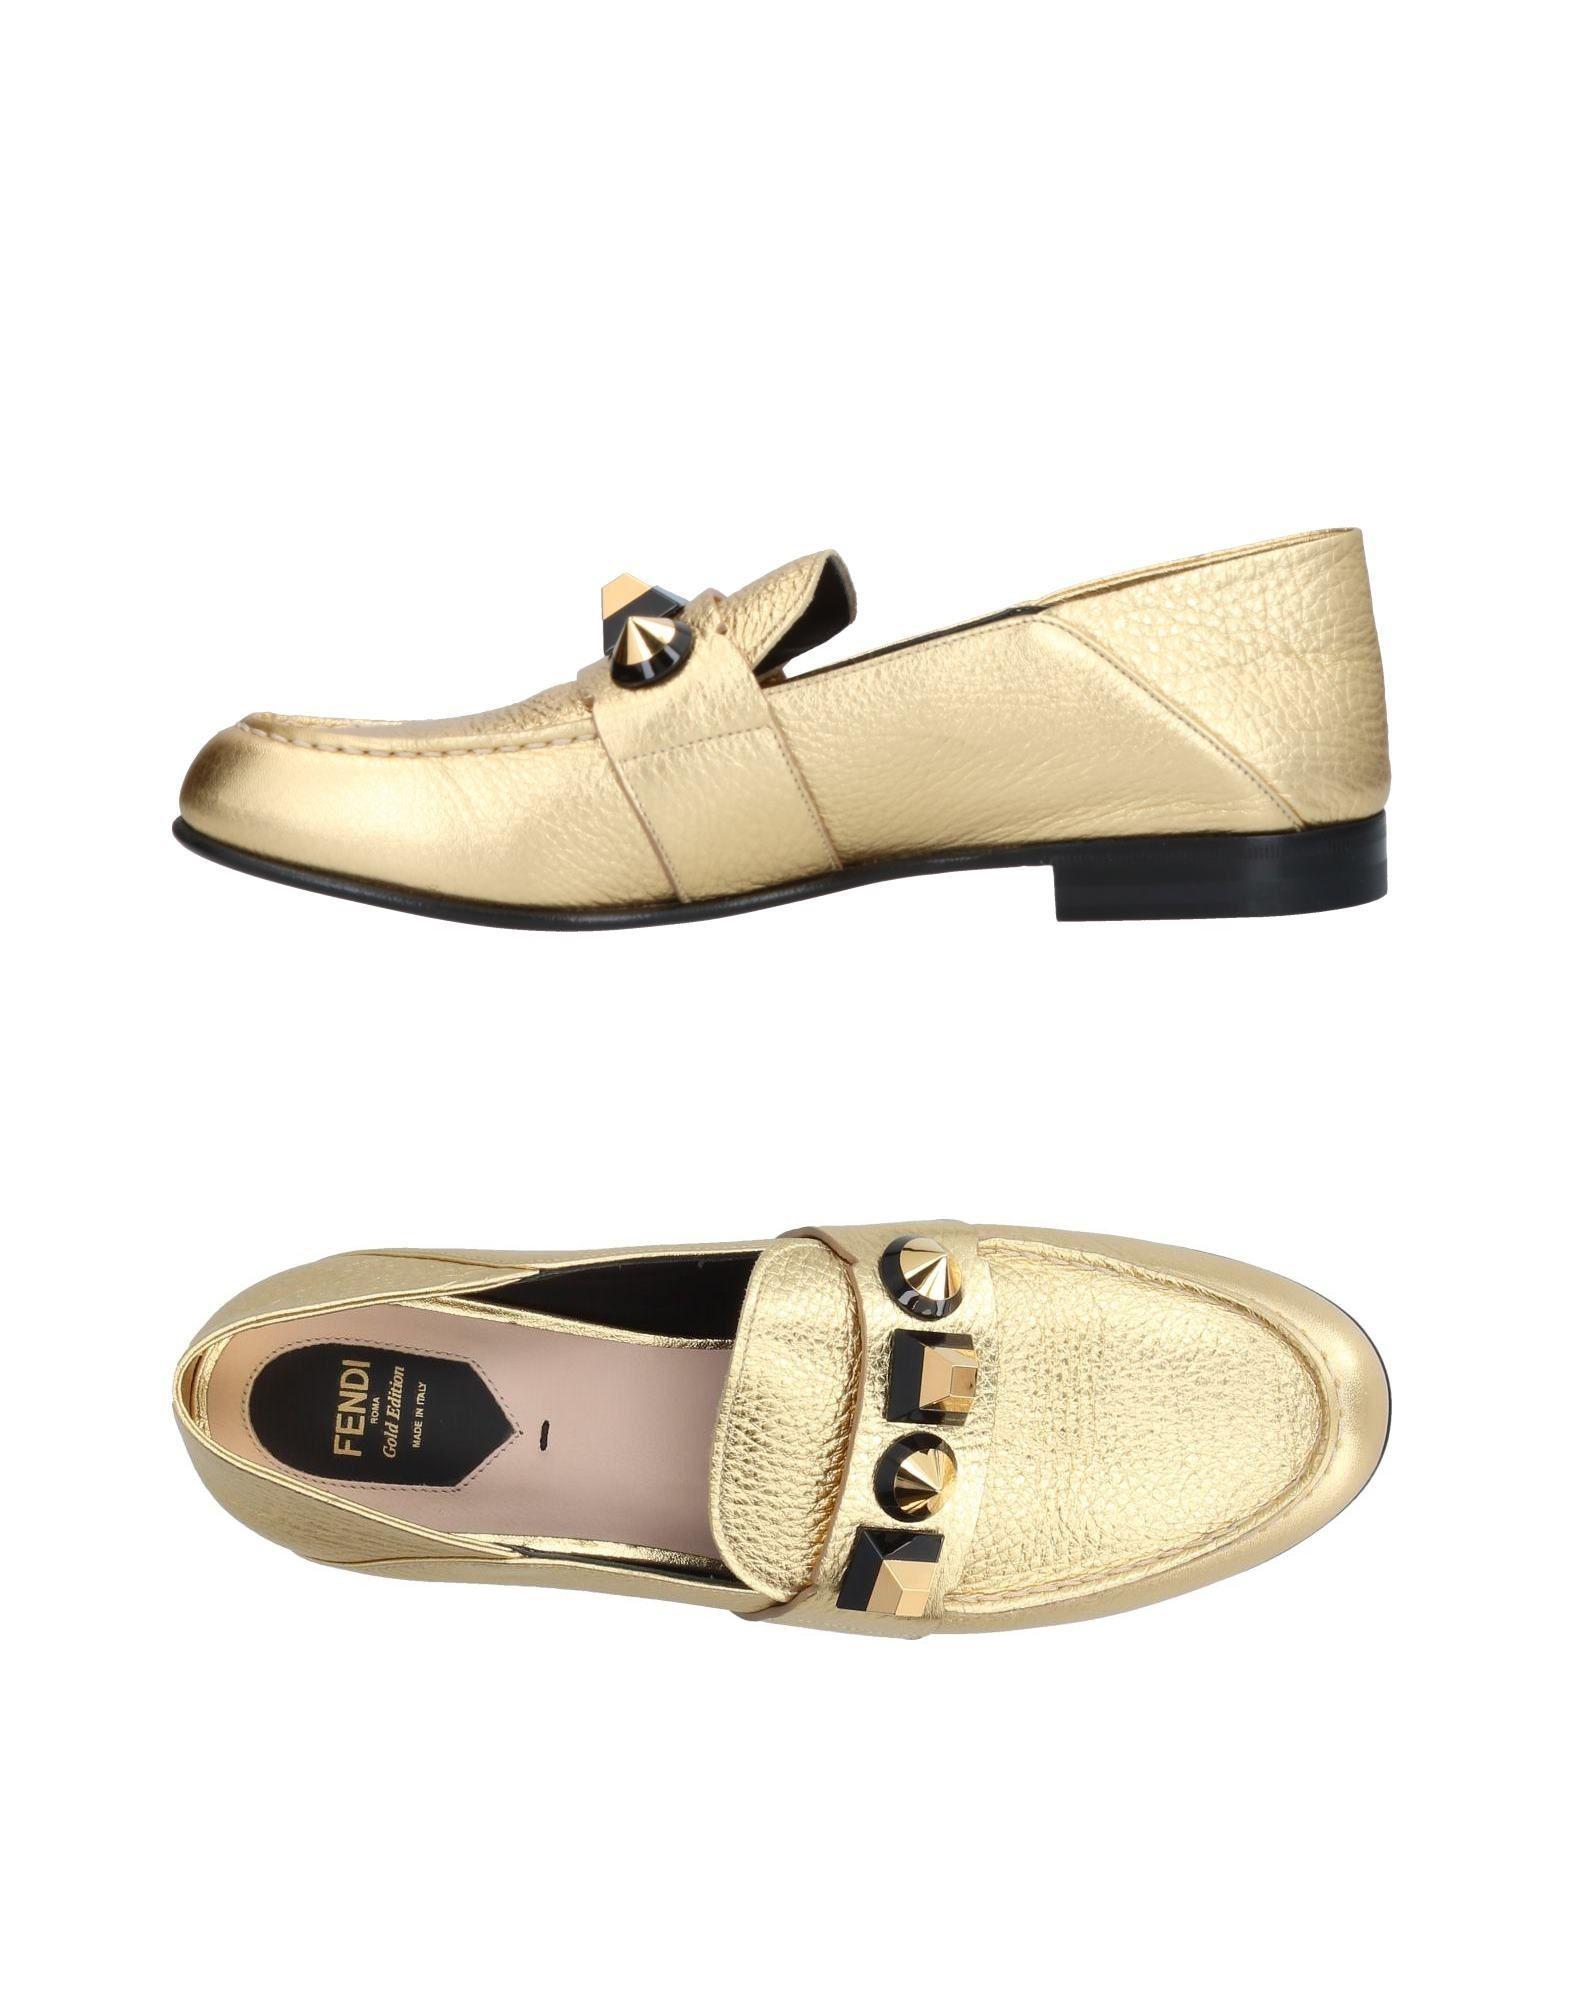 Fendi Leather Loafer in Gold (Metallic) - Lyst